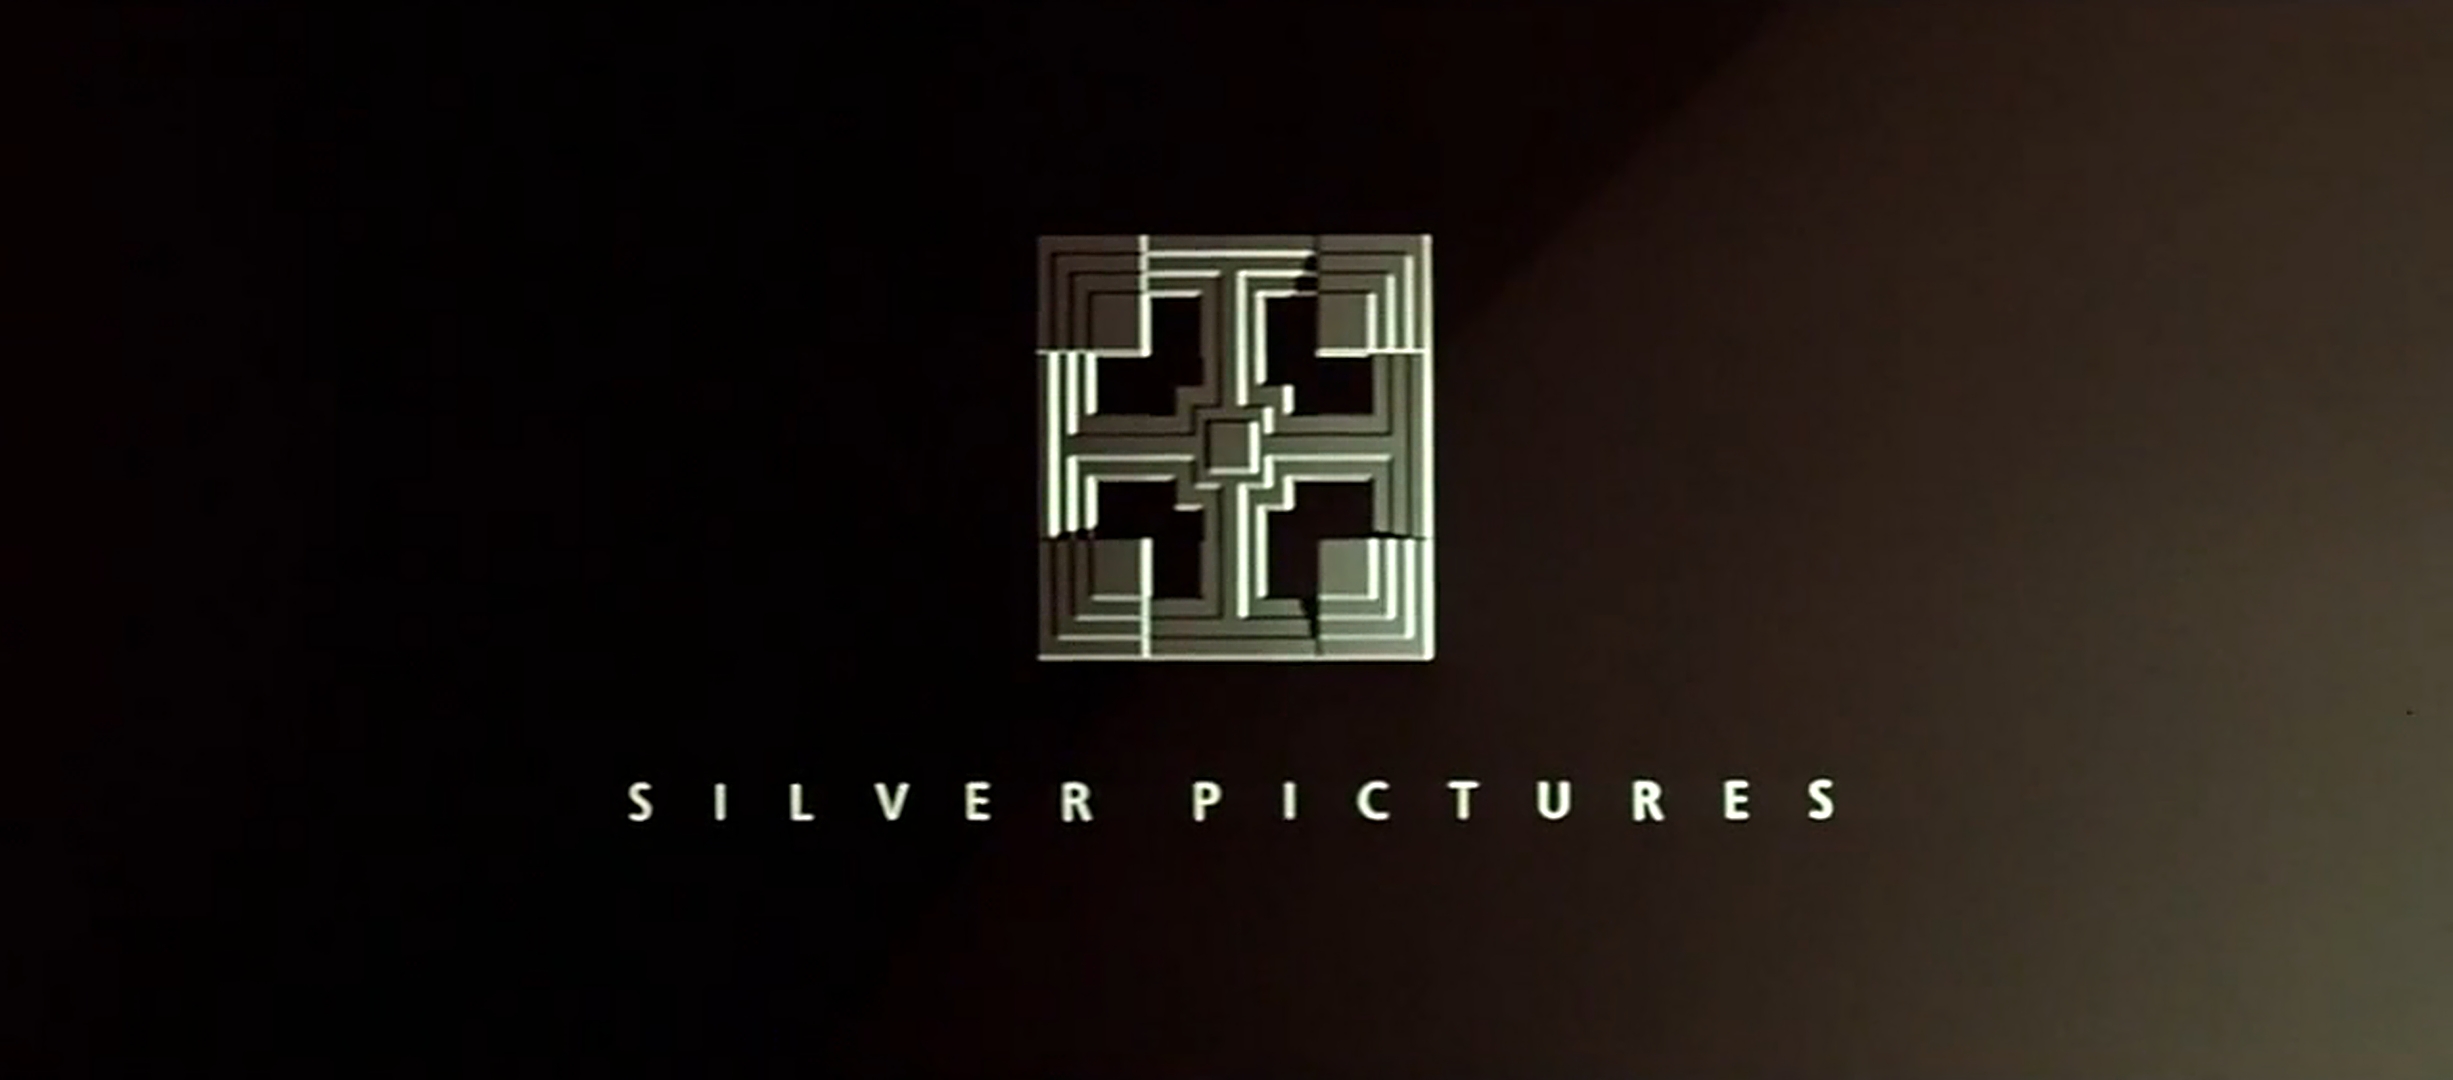 Silver Pictures (1991) - Early Variant